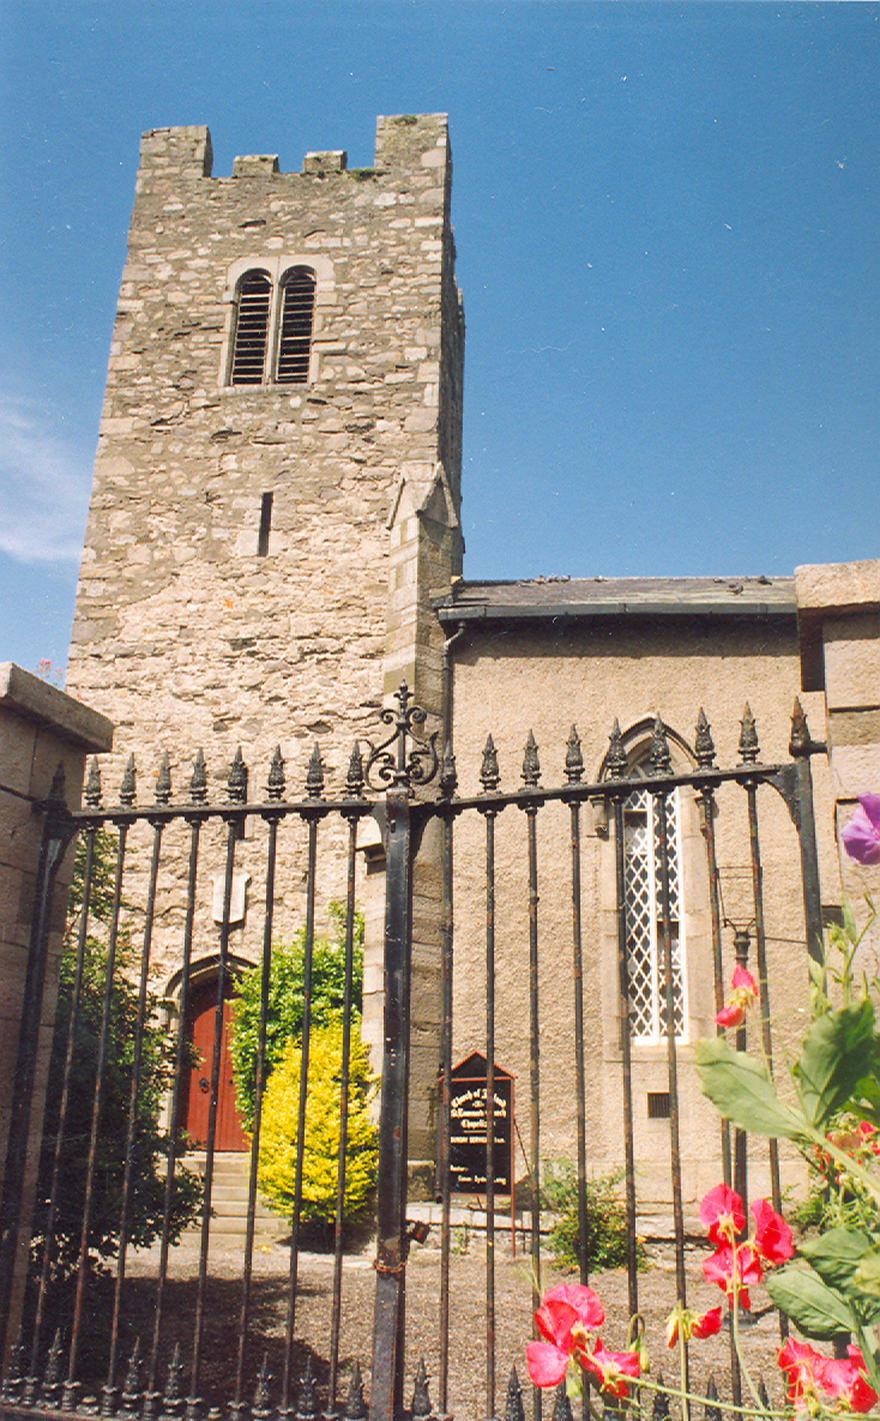 St Laurence’s Church, Chapelizod in the parish of Crumlin and Chapelizod